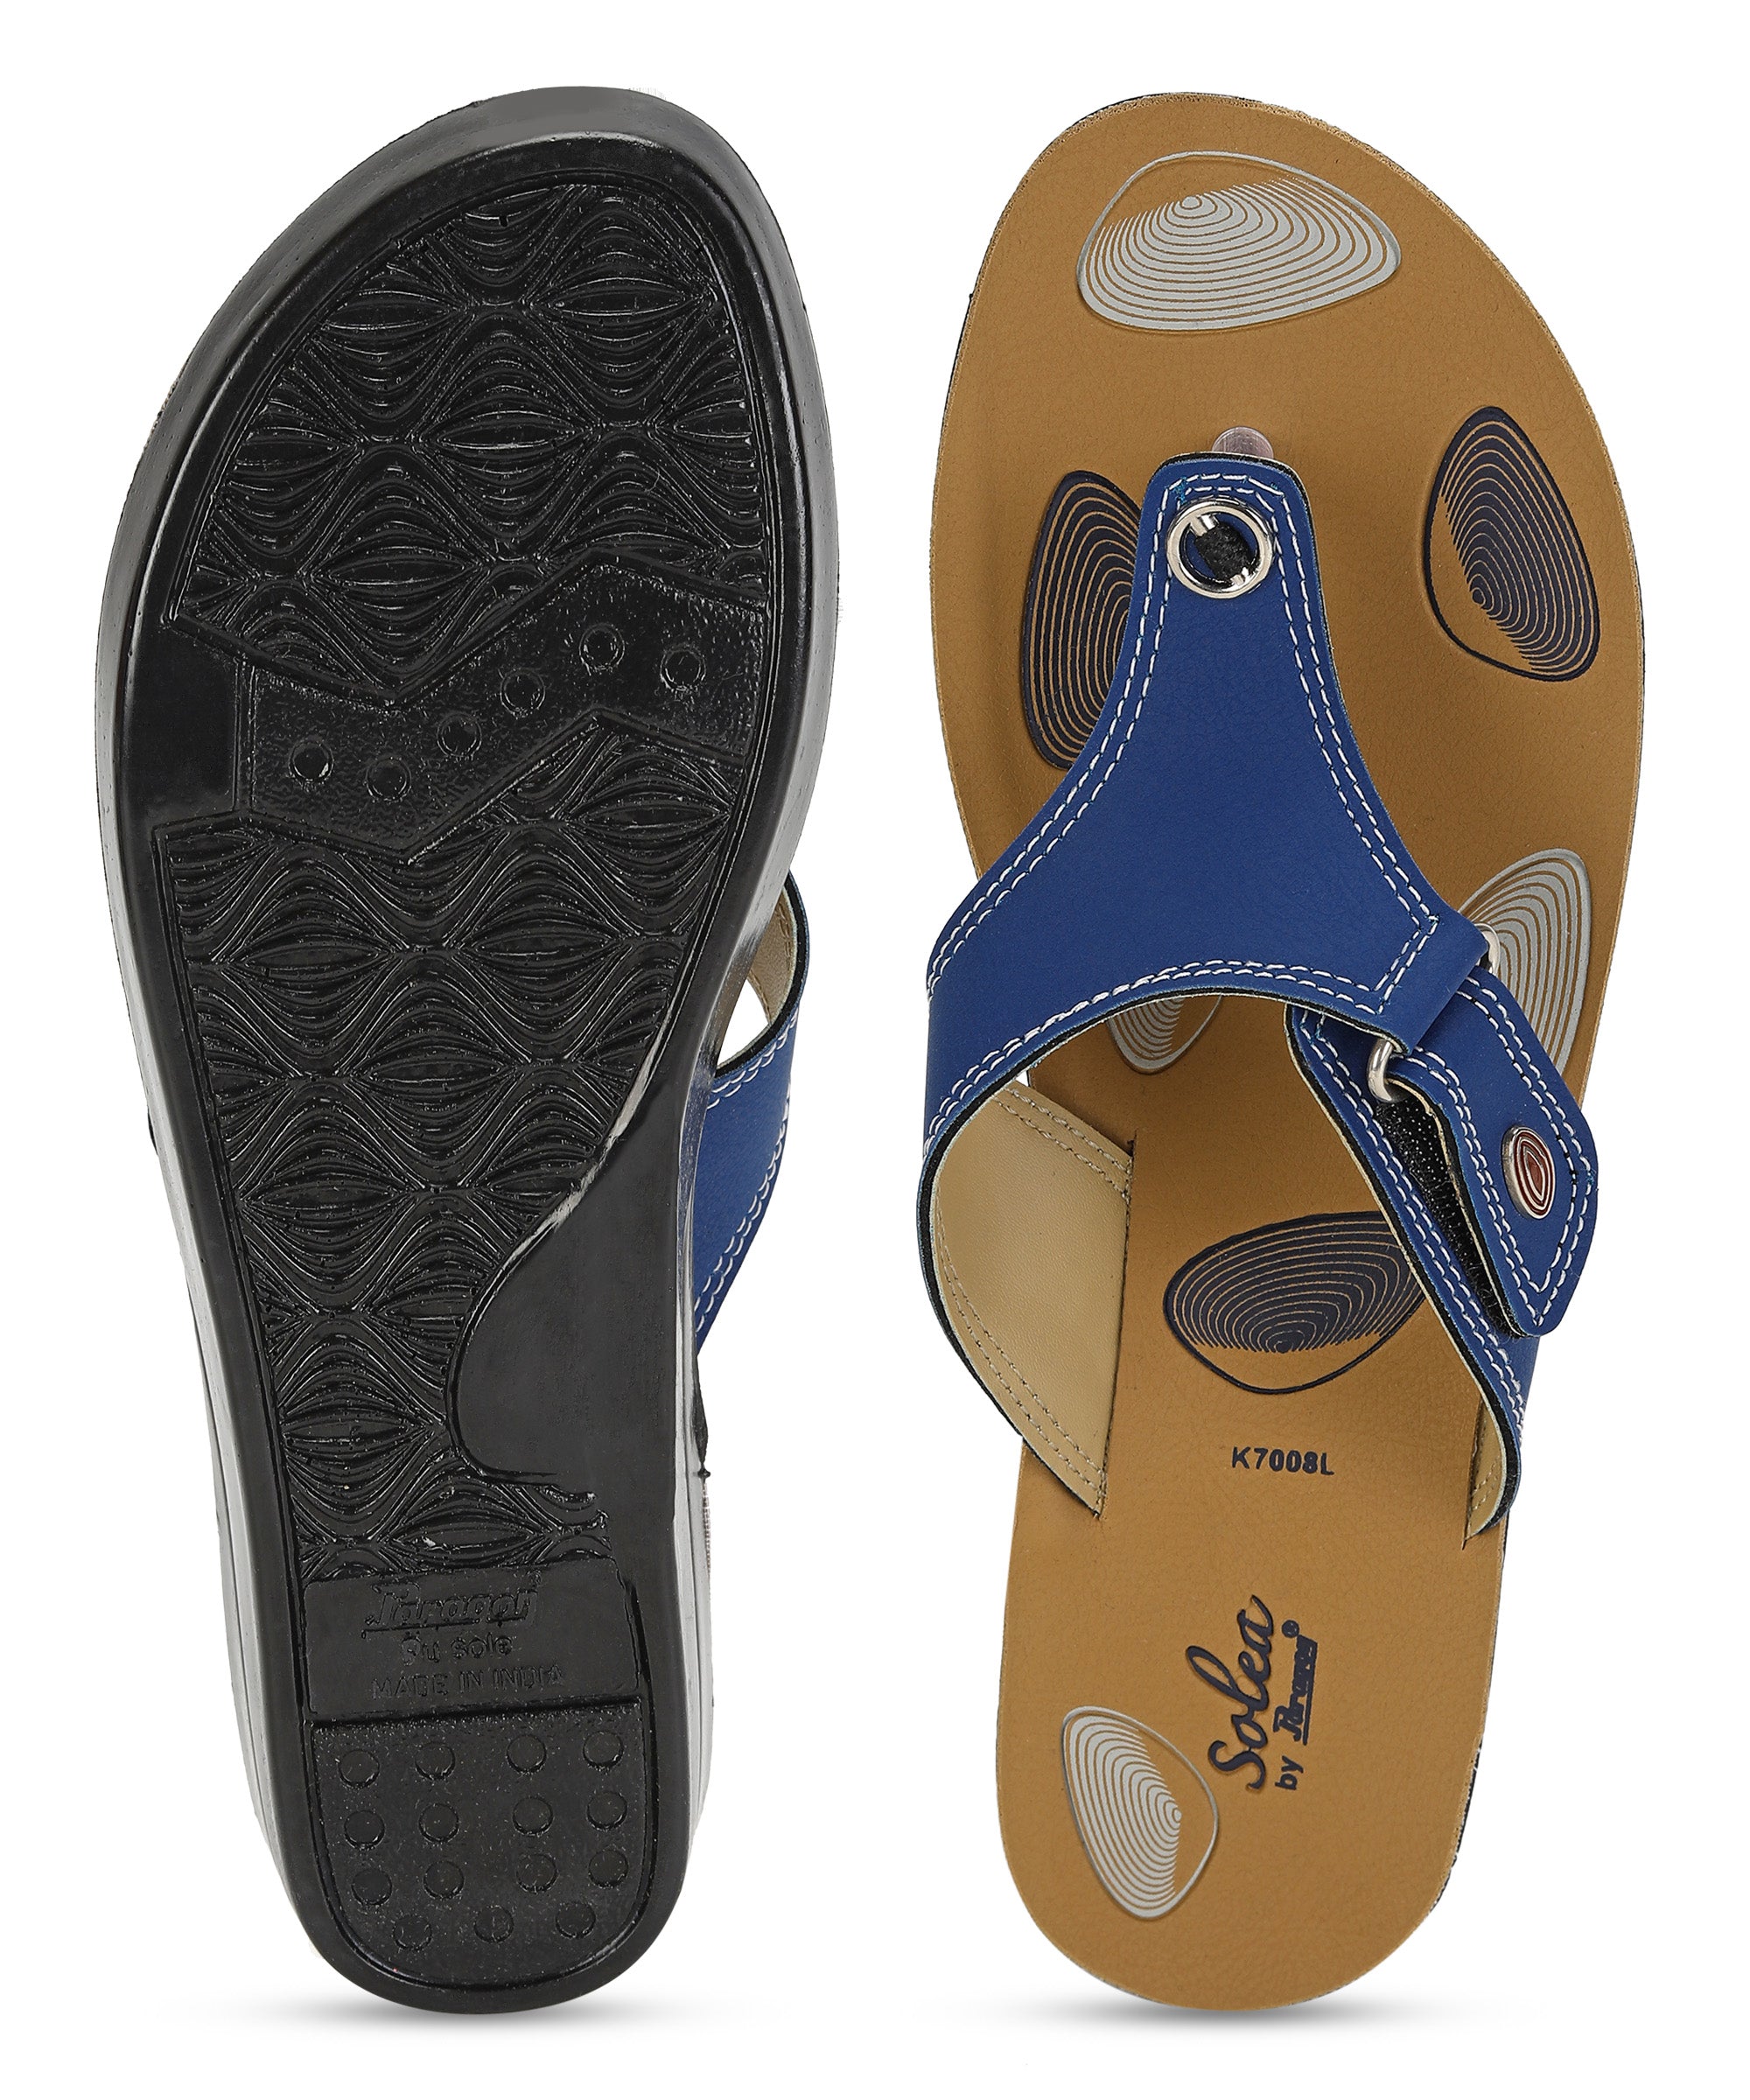 Paragon  PUK7008L Women Sandals | Casual &amp; Formal Sandals | Stylish, Comfortable &amp; Durable | For Daily &amp; Occasion Wear